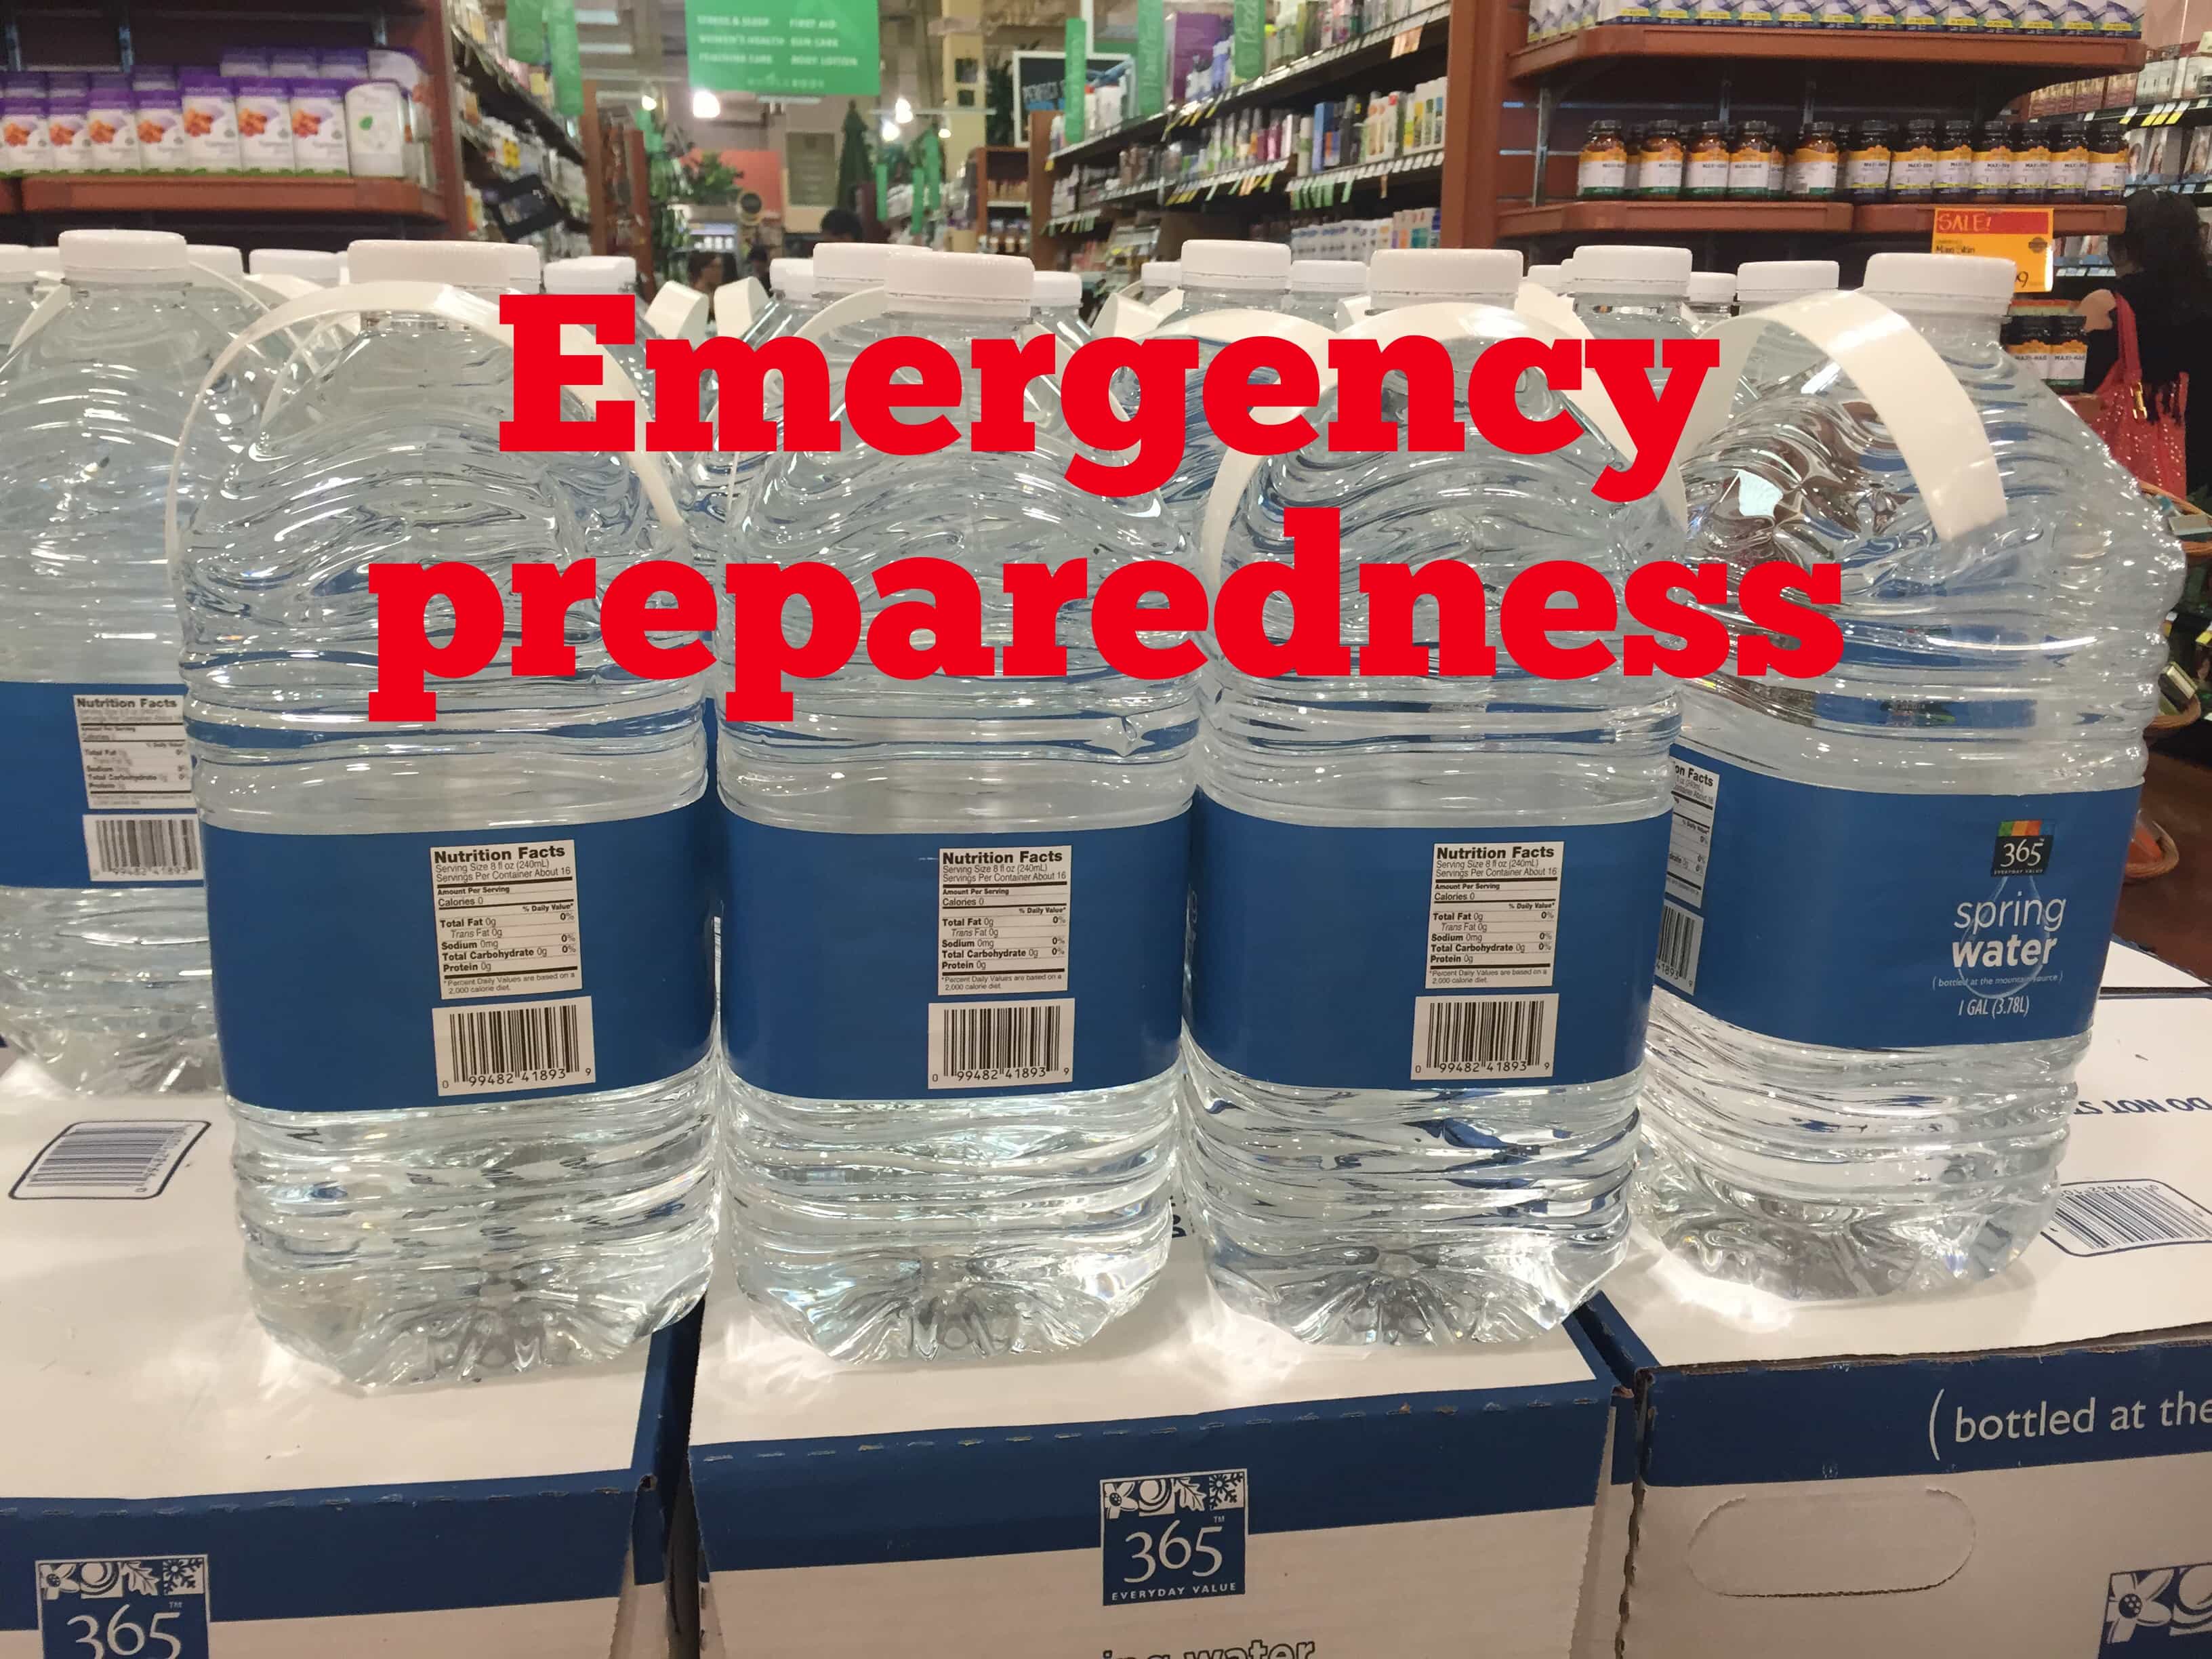 20 Essential Items You Should Have In Your Emergency Preparedness Kit